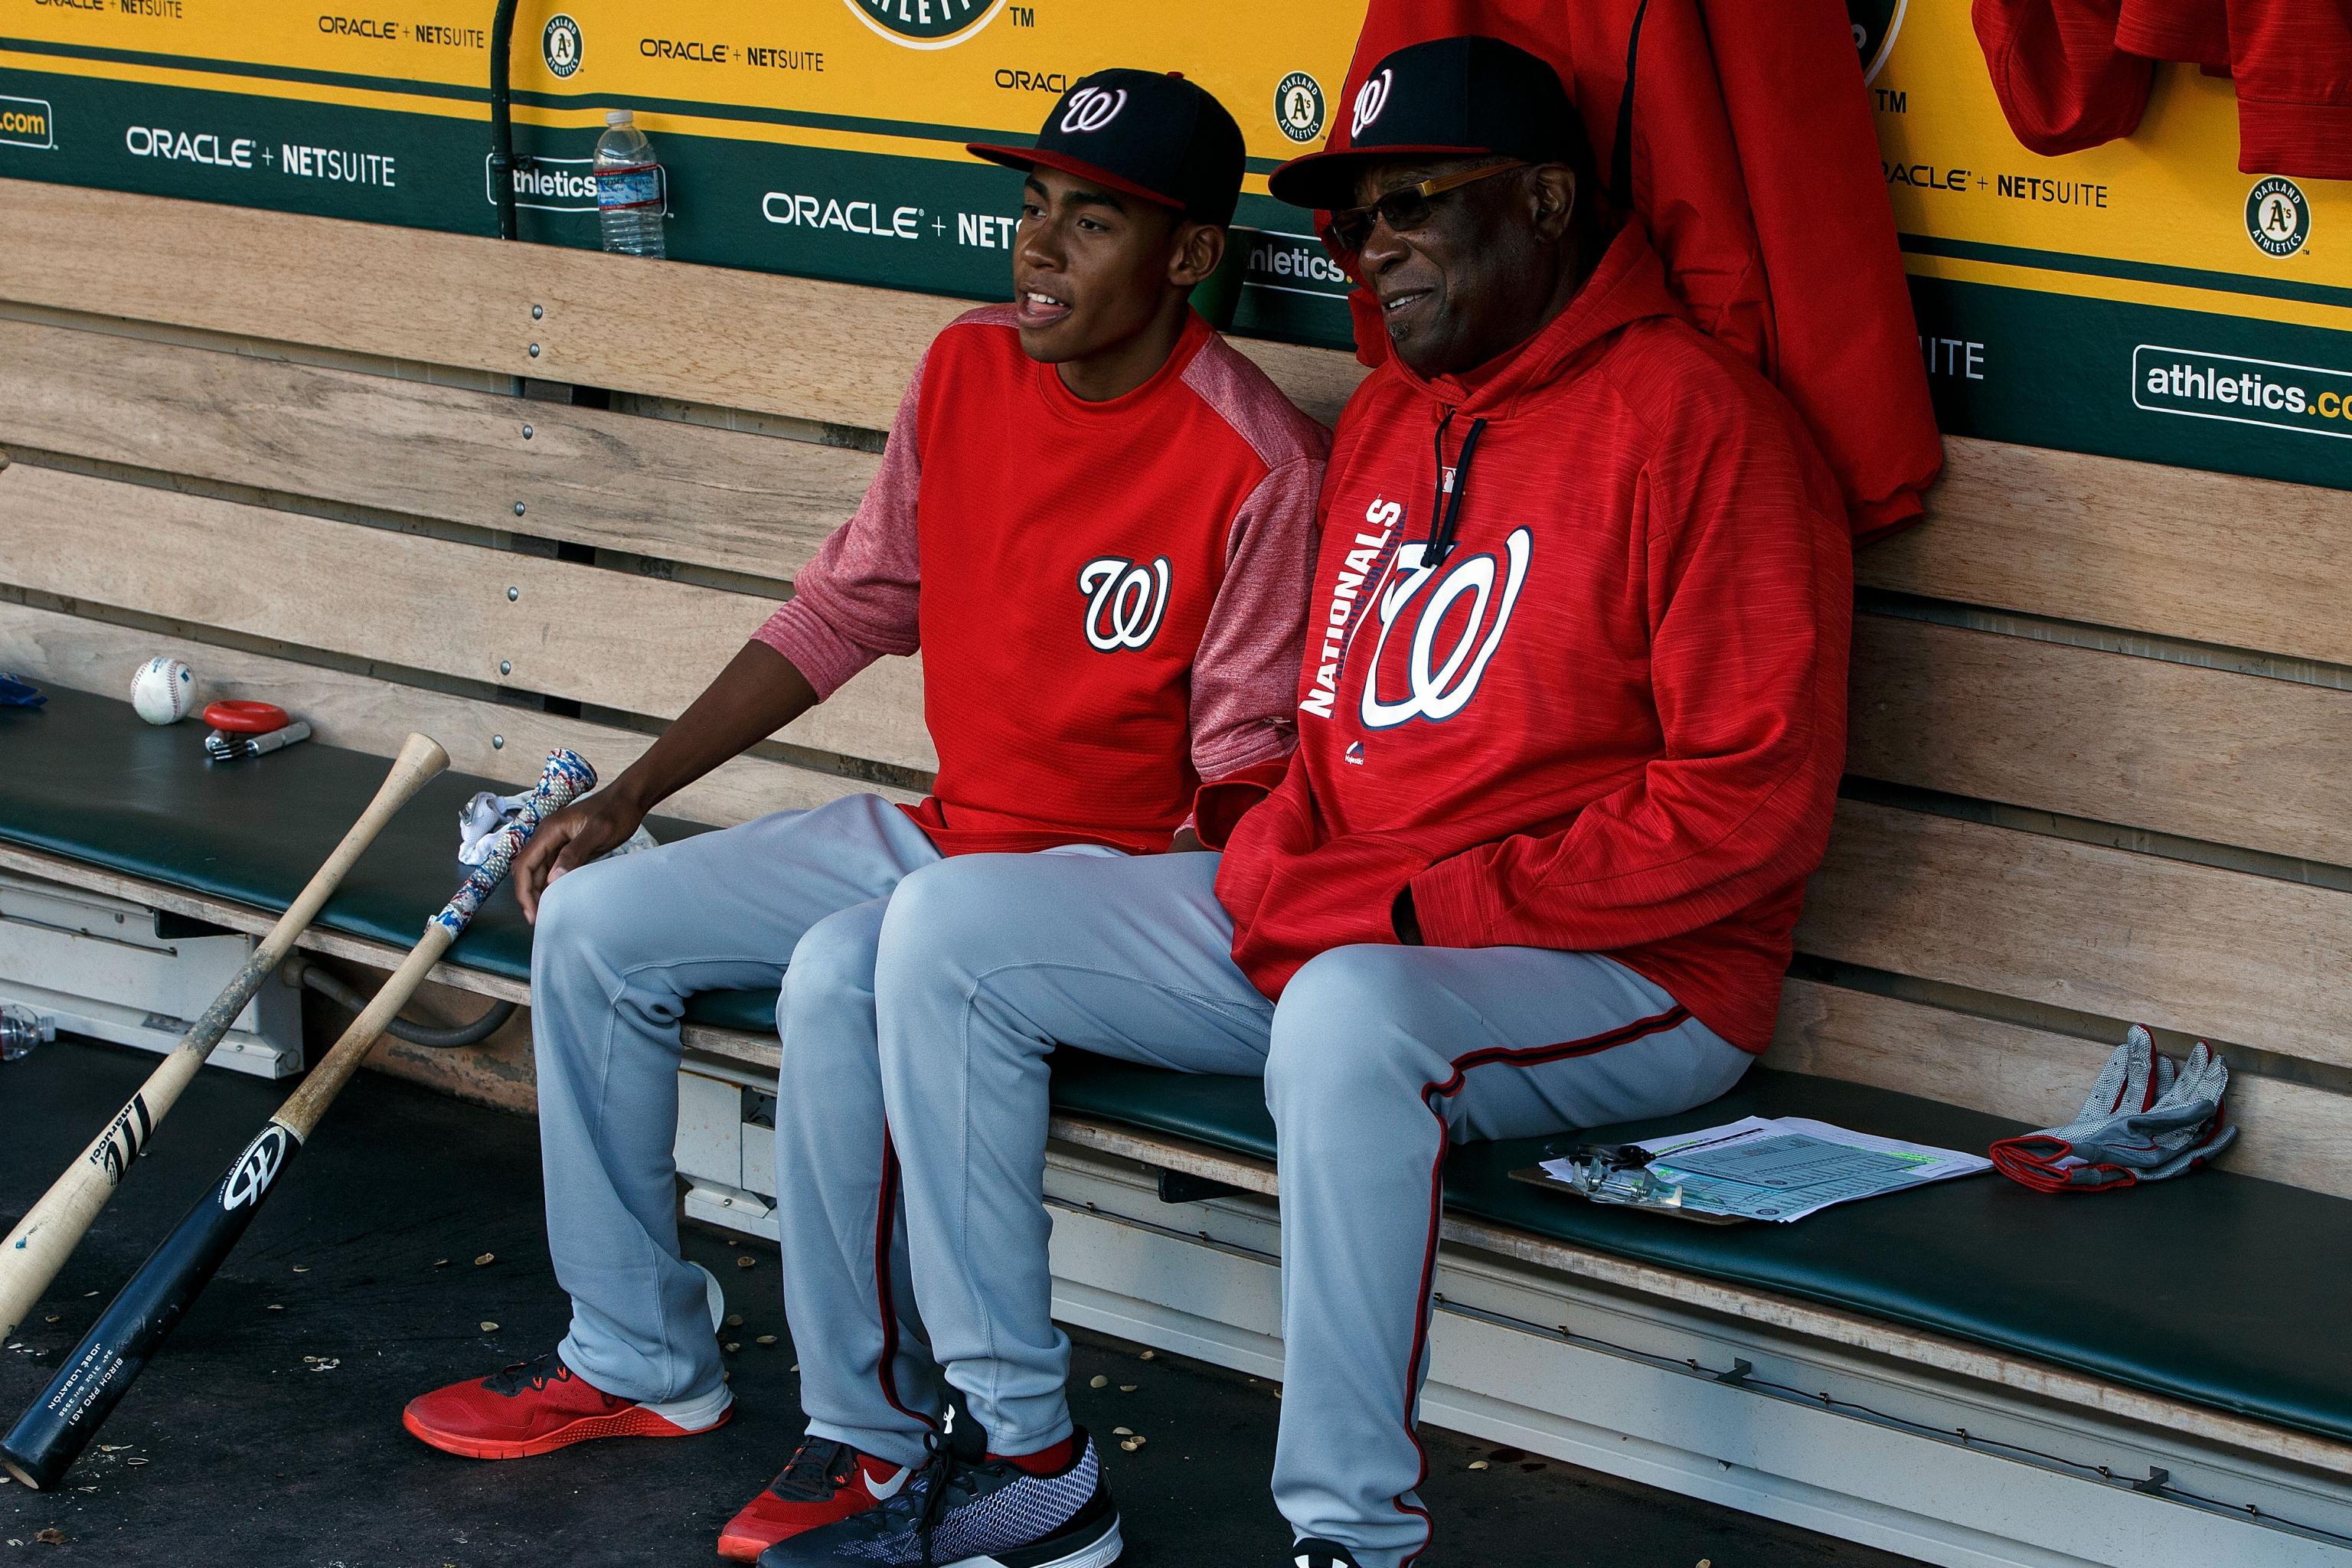 Dusty Baker goes viral for cool moment with son Darren at Spring